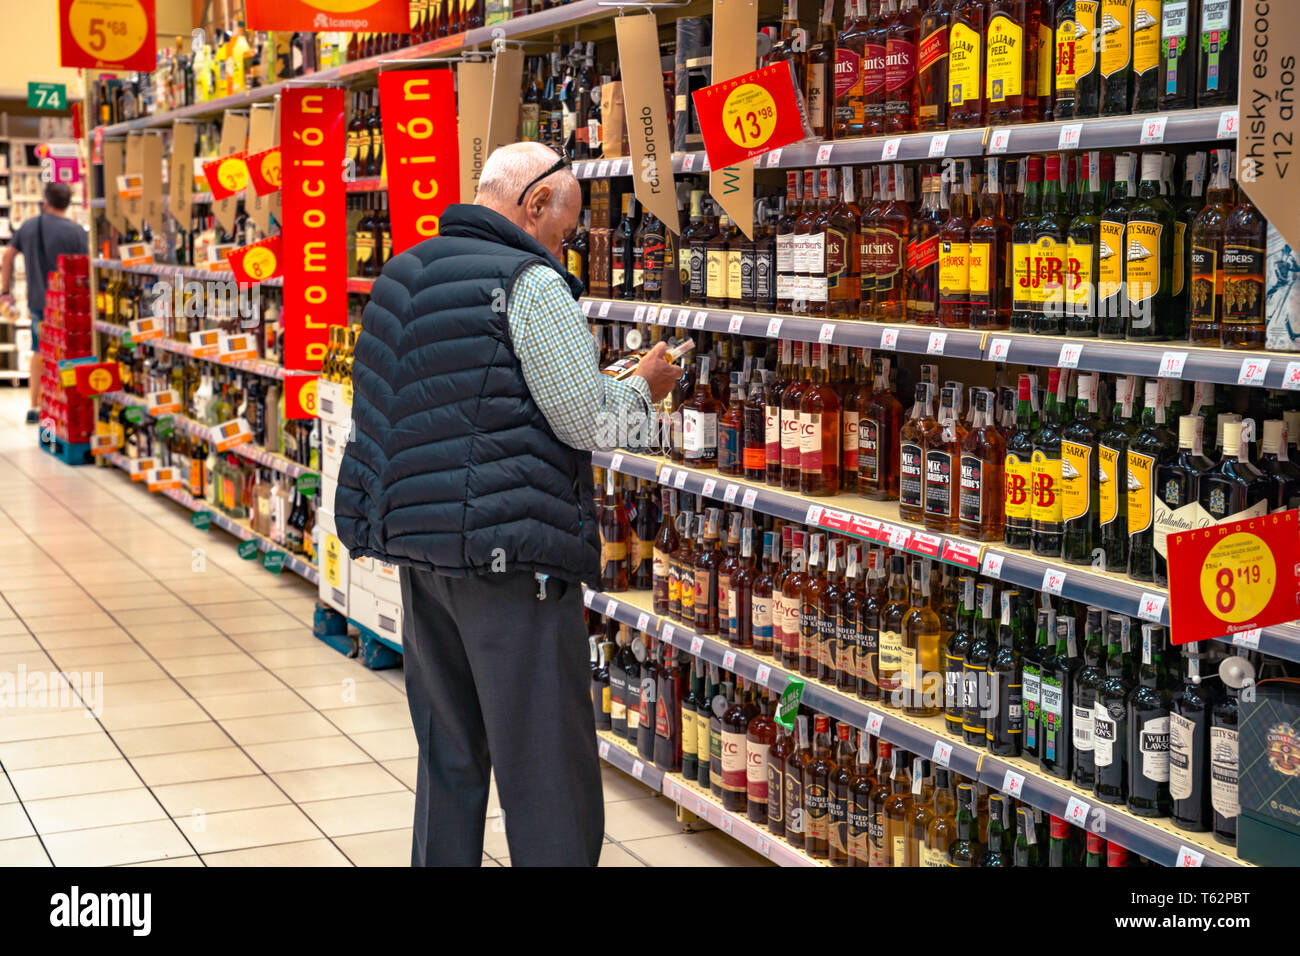 Valencia,Spain - April 27, 2019: Man choosing alcohol beverage. Hypermarket, spirits and wines department. Stock Photo